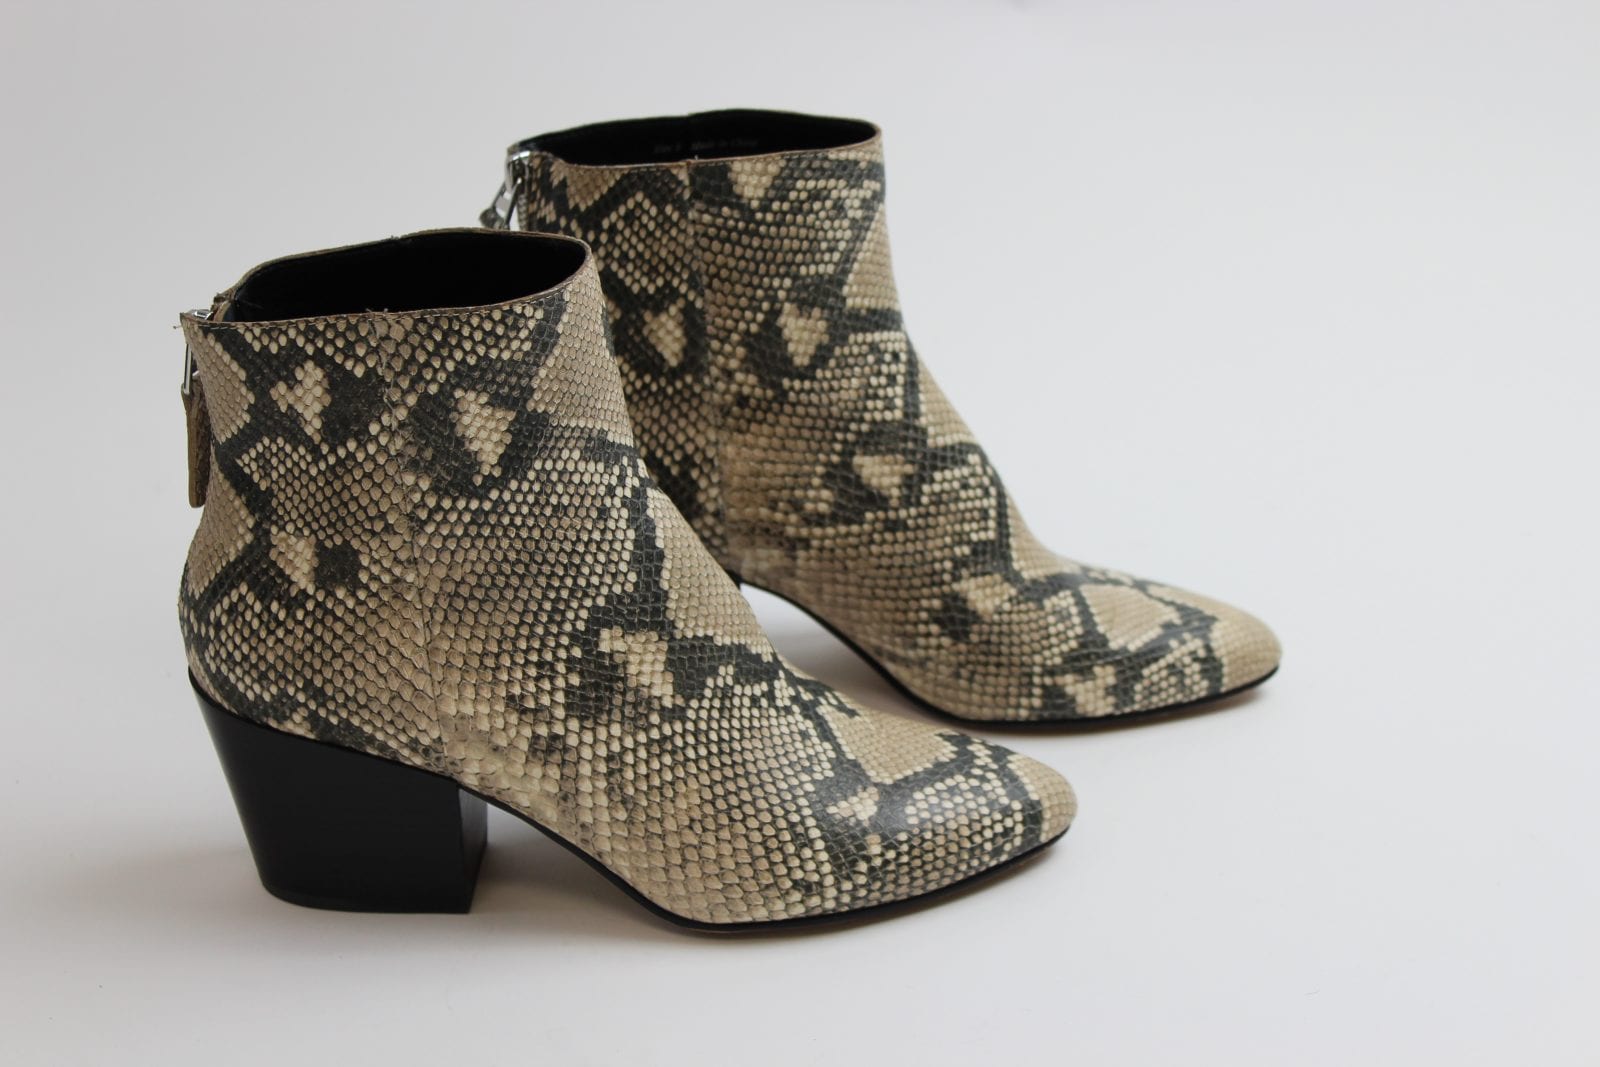 dolce vita coltyn snakeskin leather booties